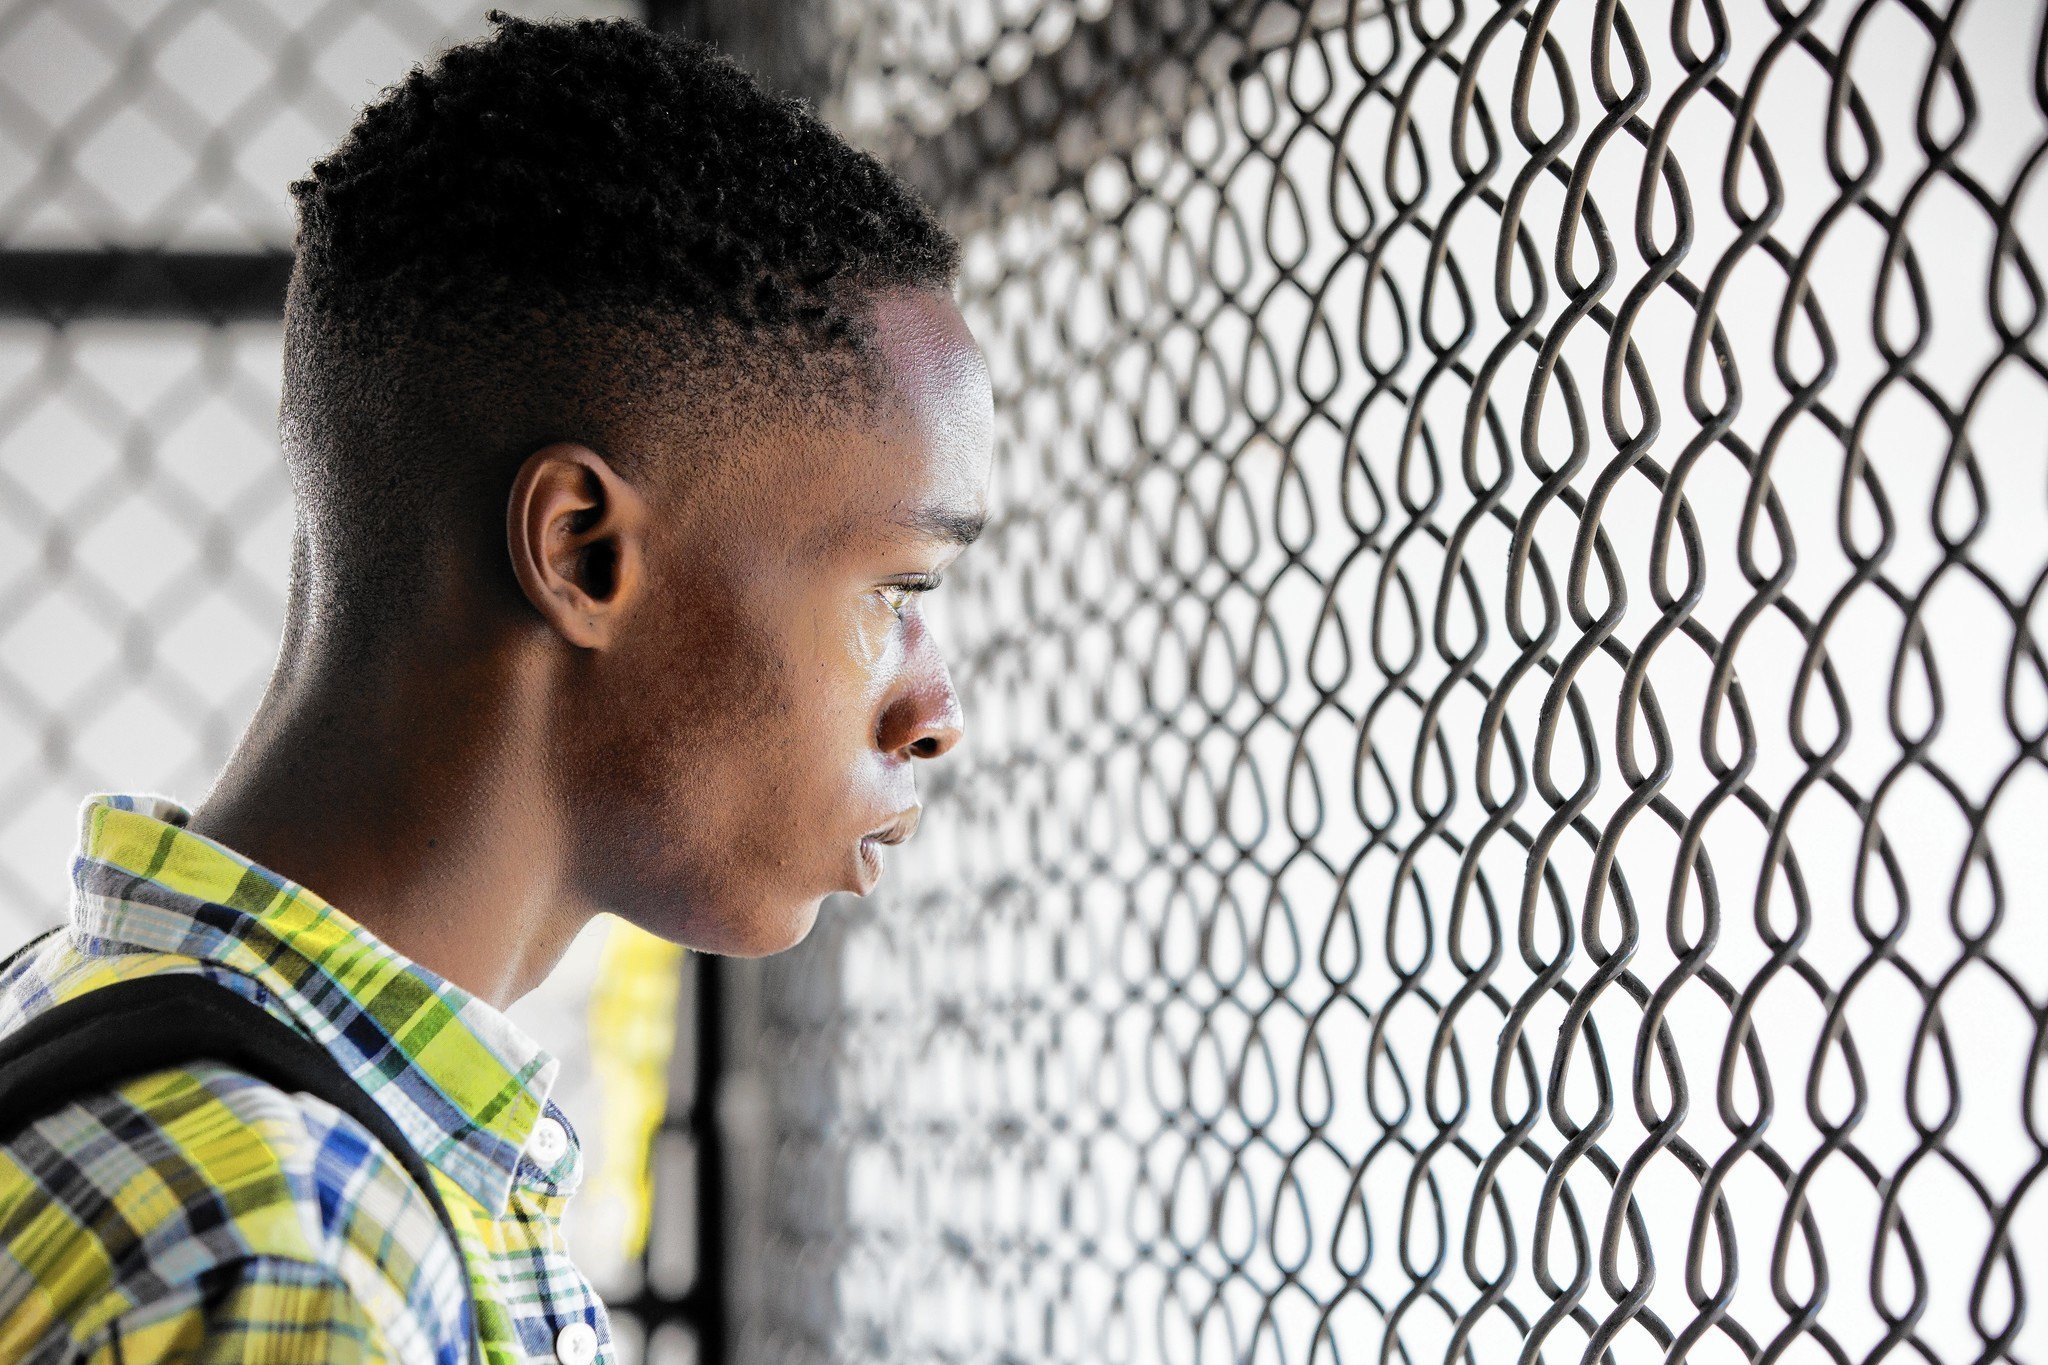 Chiron, as a teenager, stares through a fence in a scene from 'Moonlight.'